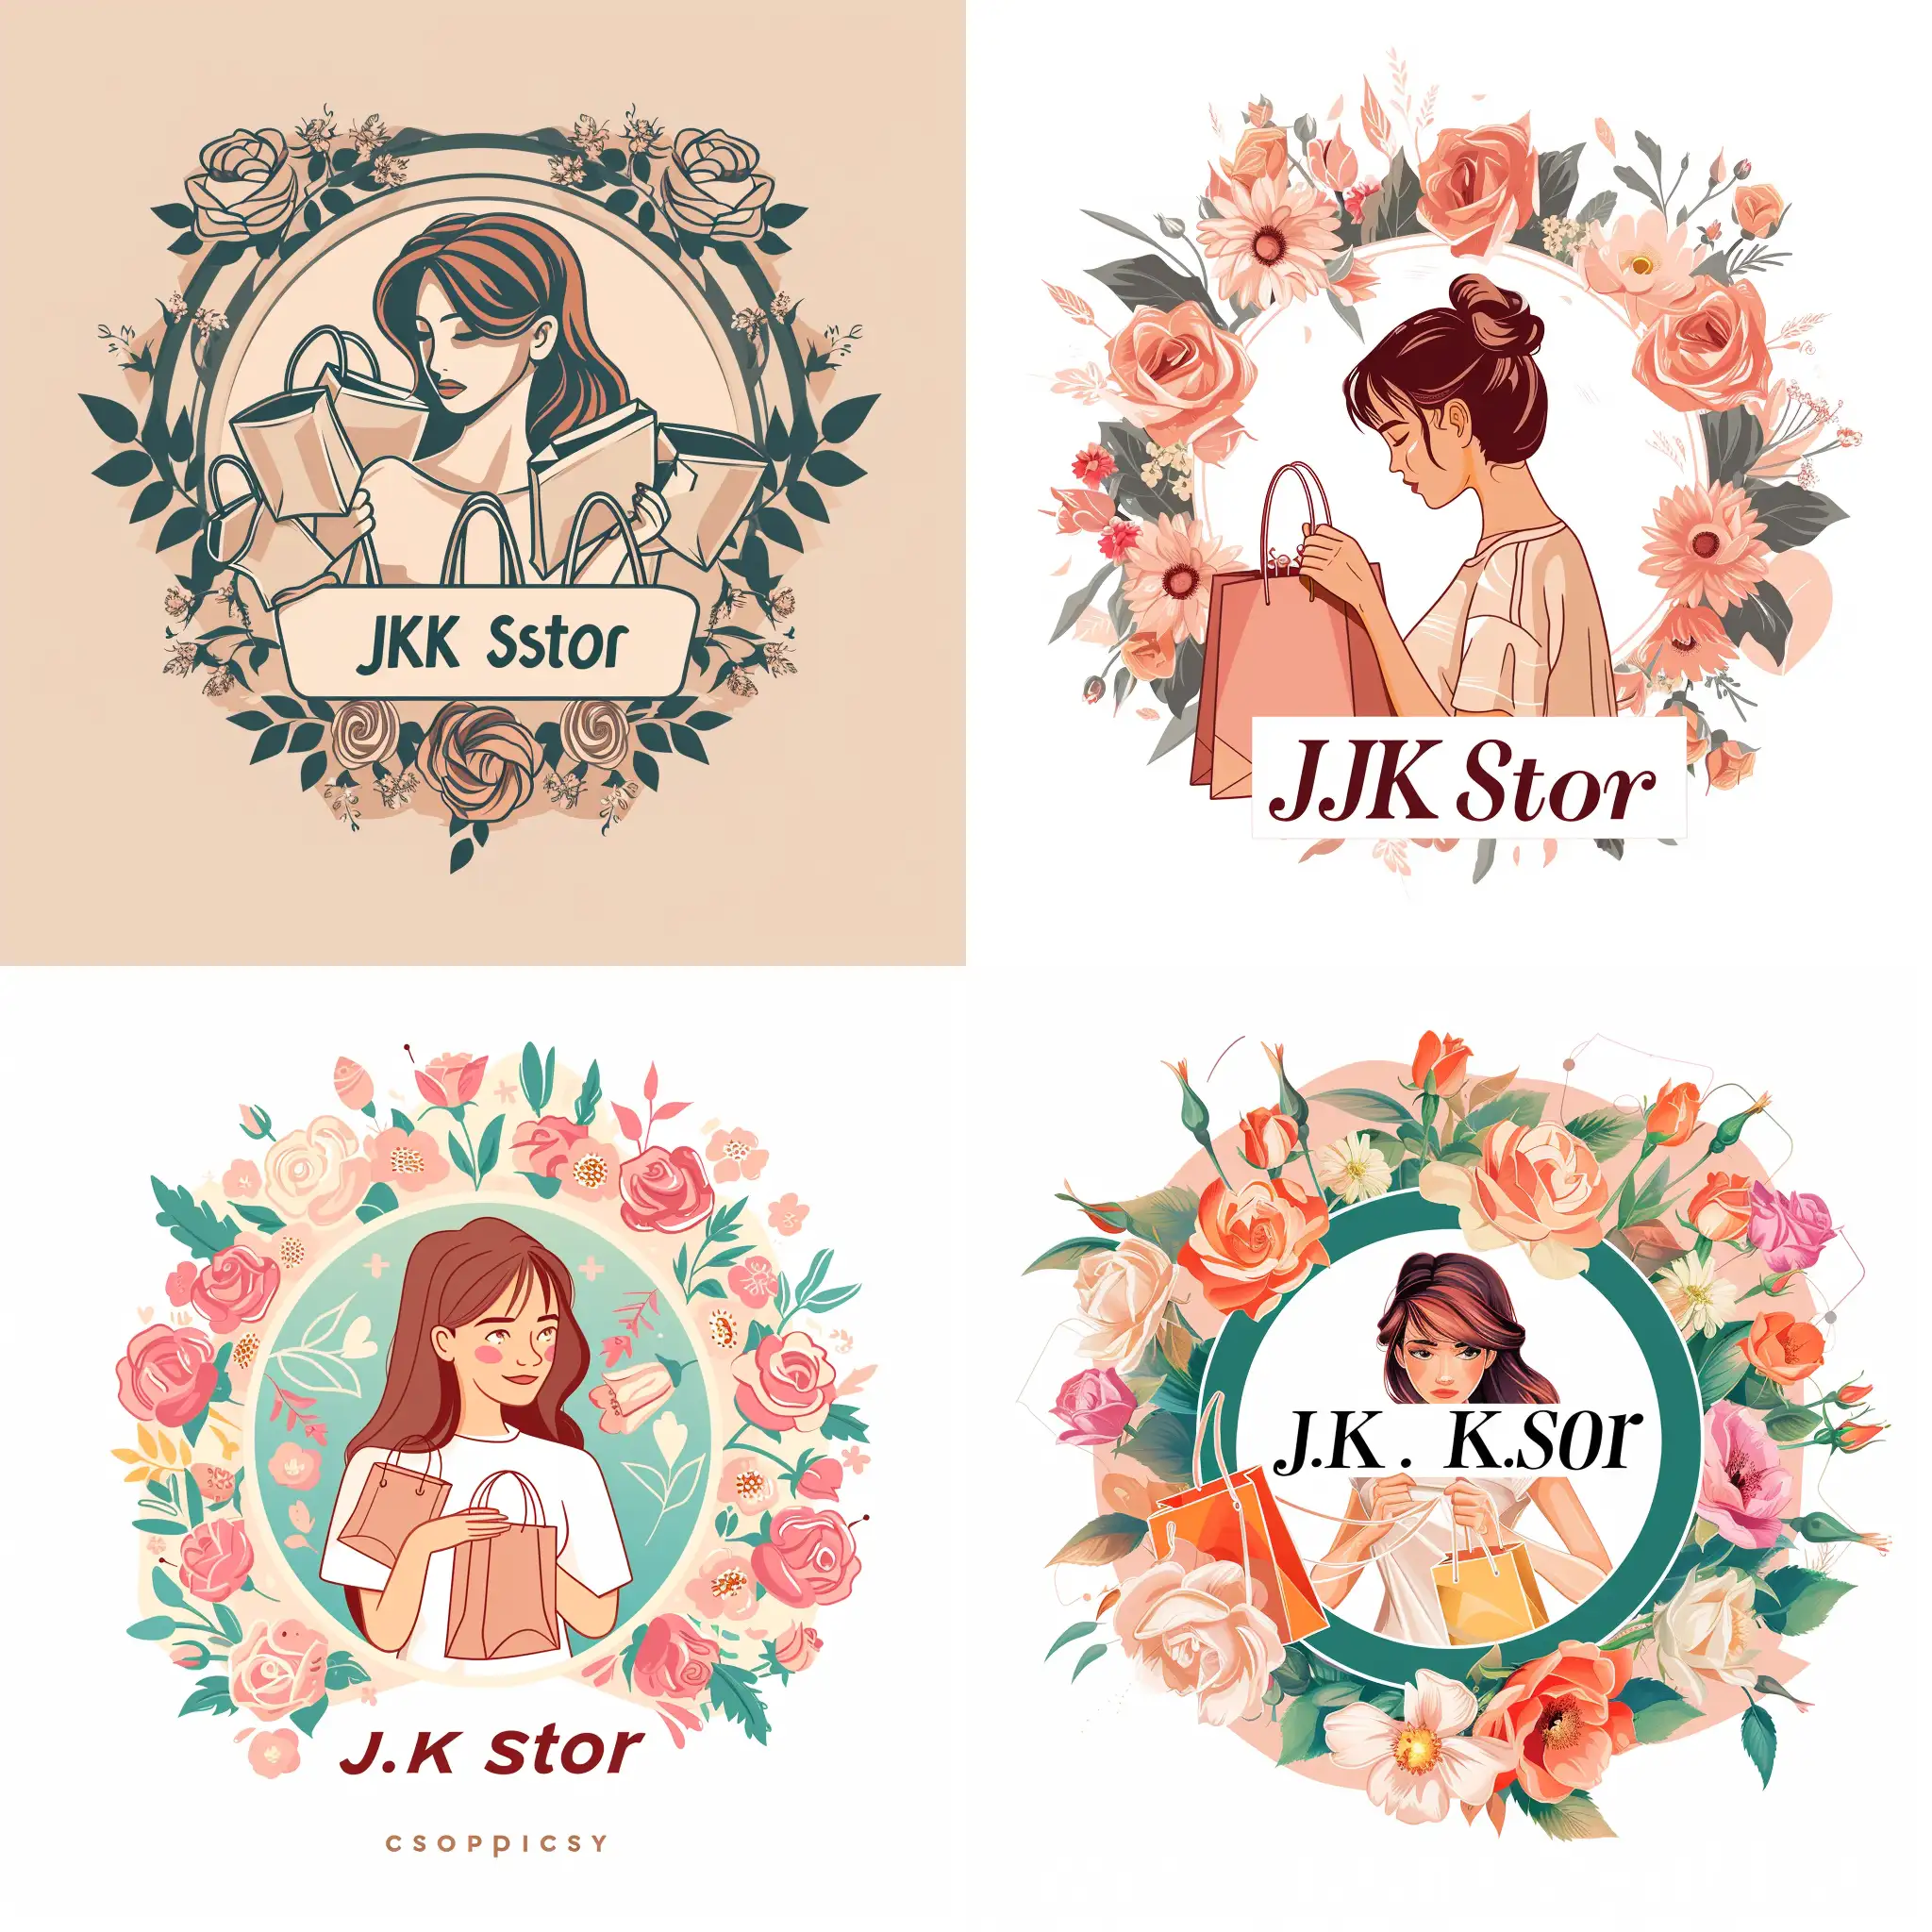 Make a logo for a women's online clothing store company called J.K Stor with a woman with her hands holding shopping bags and a circle of flowers around this woman and the background is all Rose